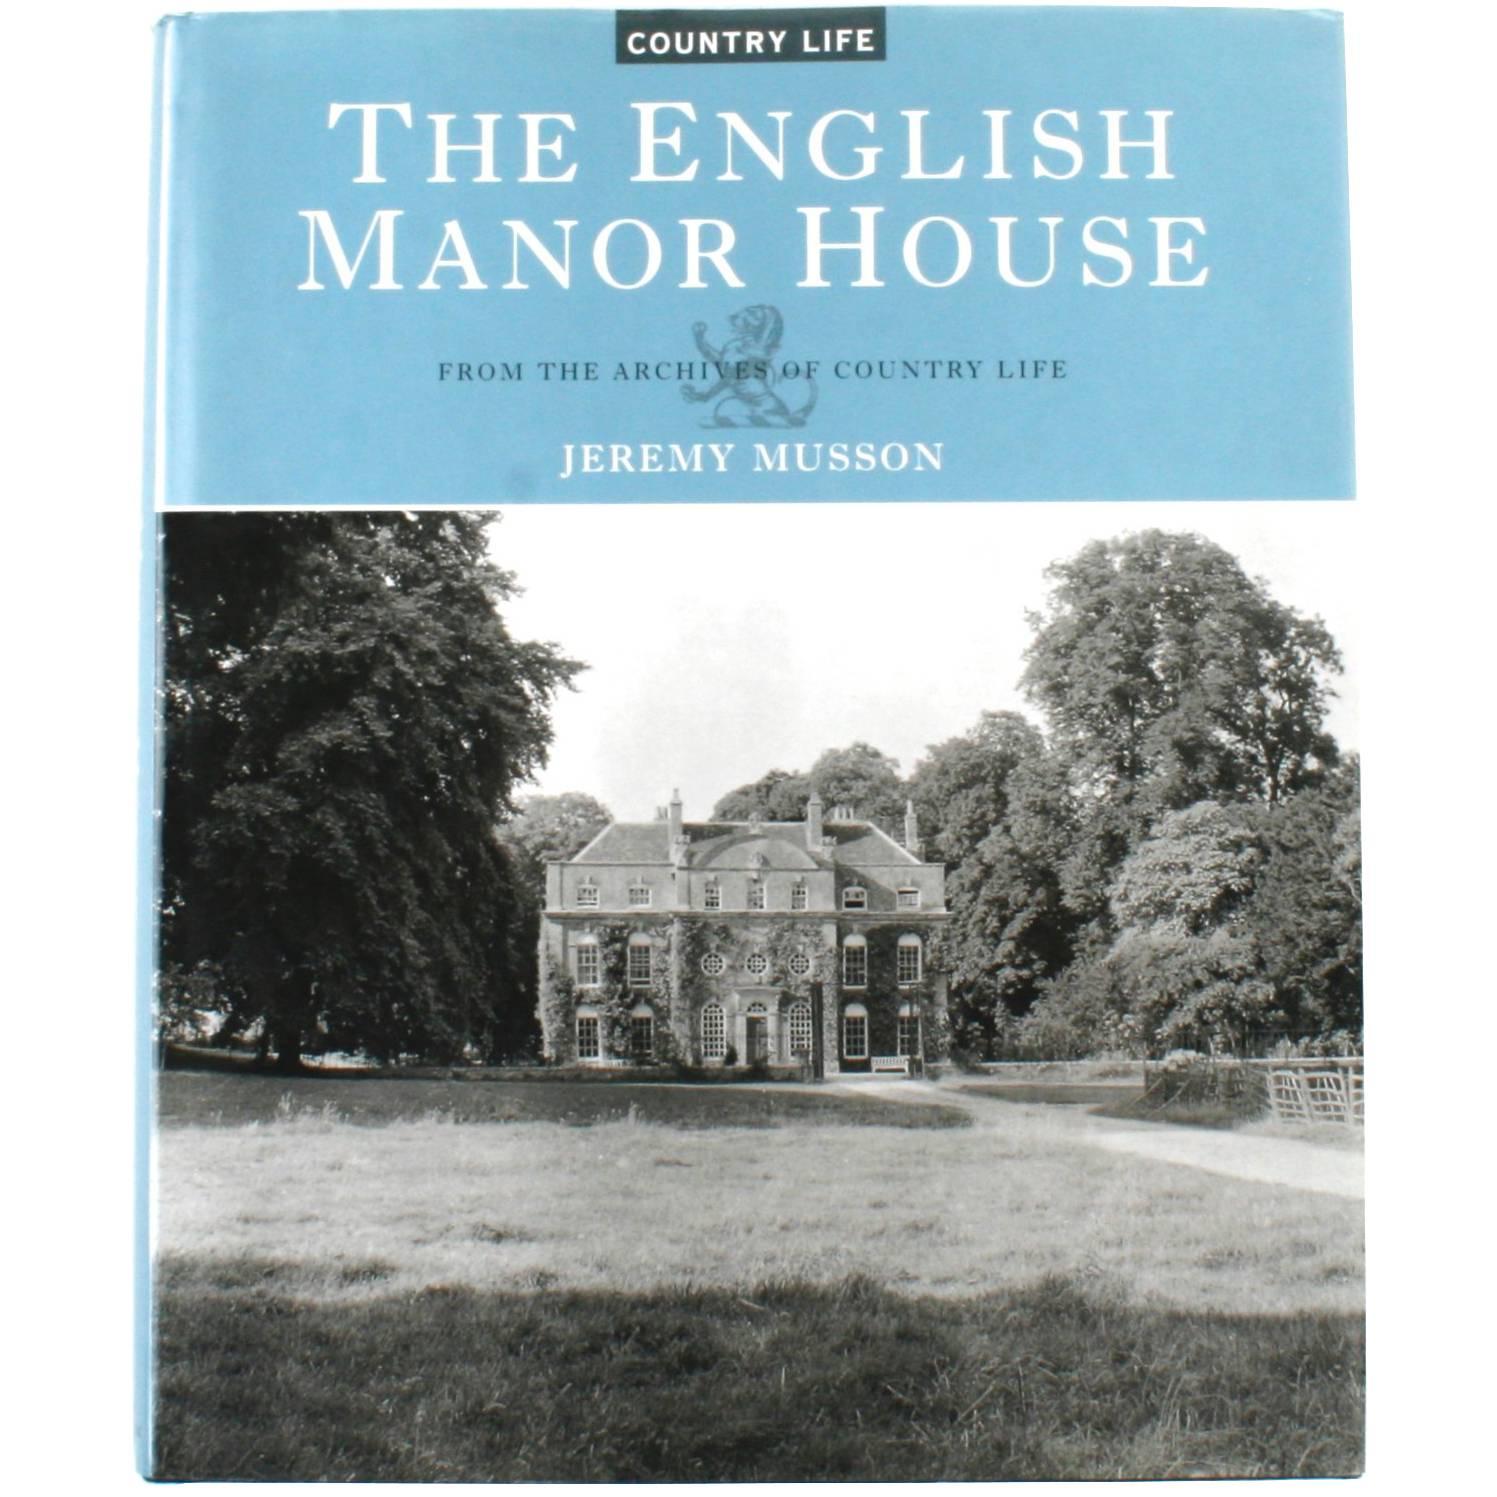 "The English Manor House: From the Archives of Country Life" Book First Edition